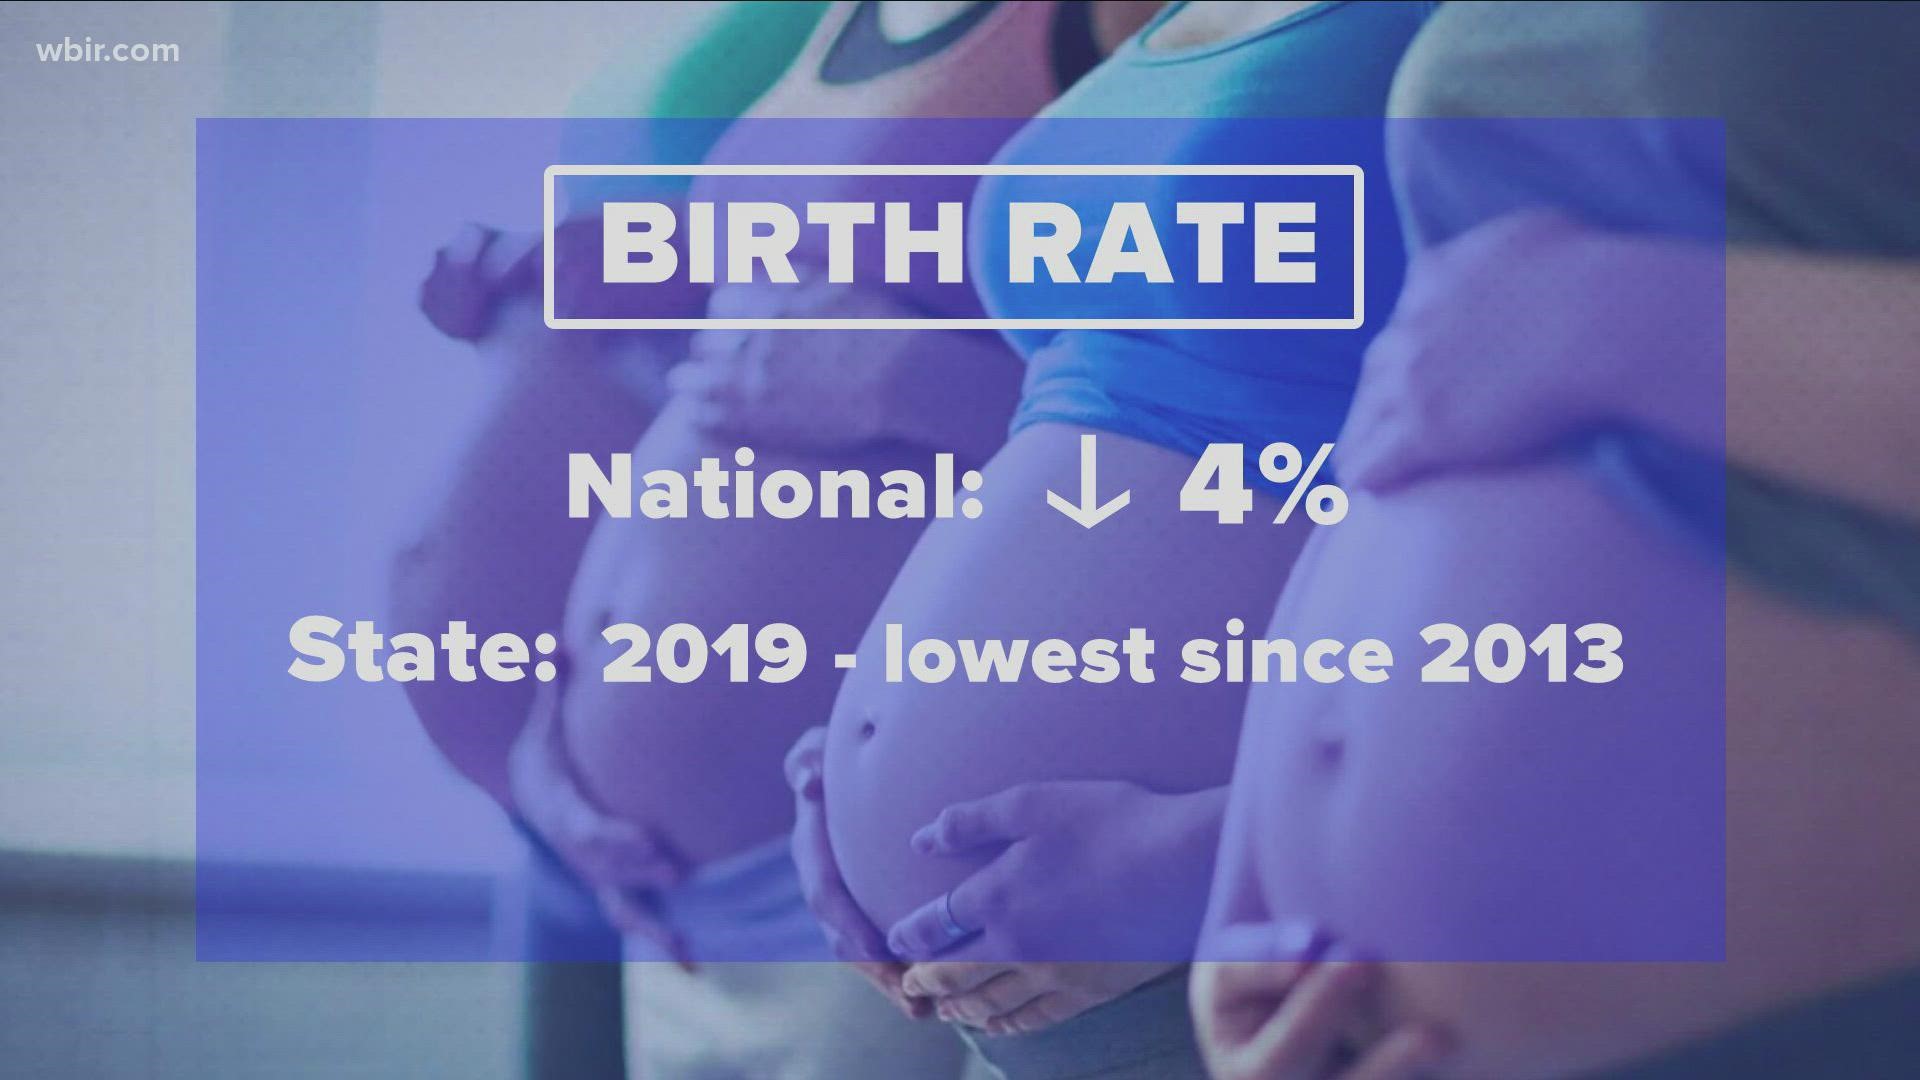 Here in Tennessee, the state says 2019 had the lowest birth total since 2013.